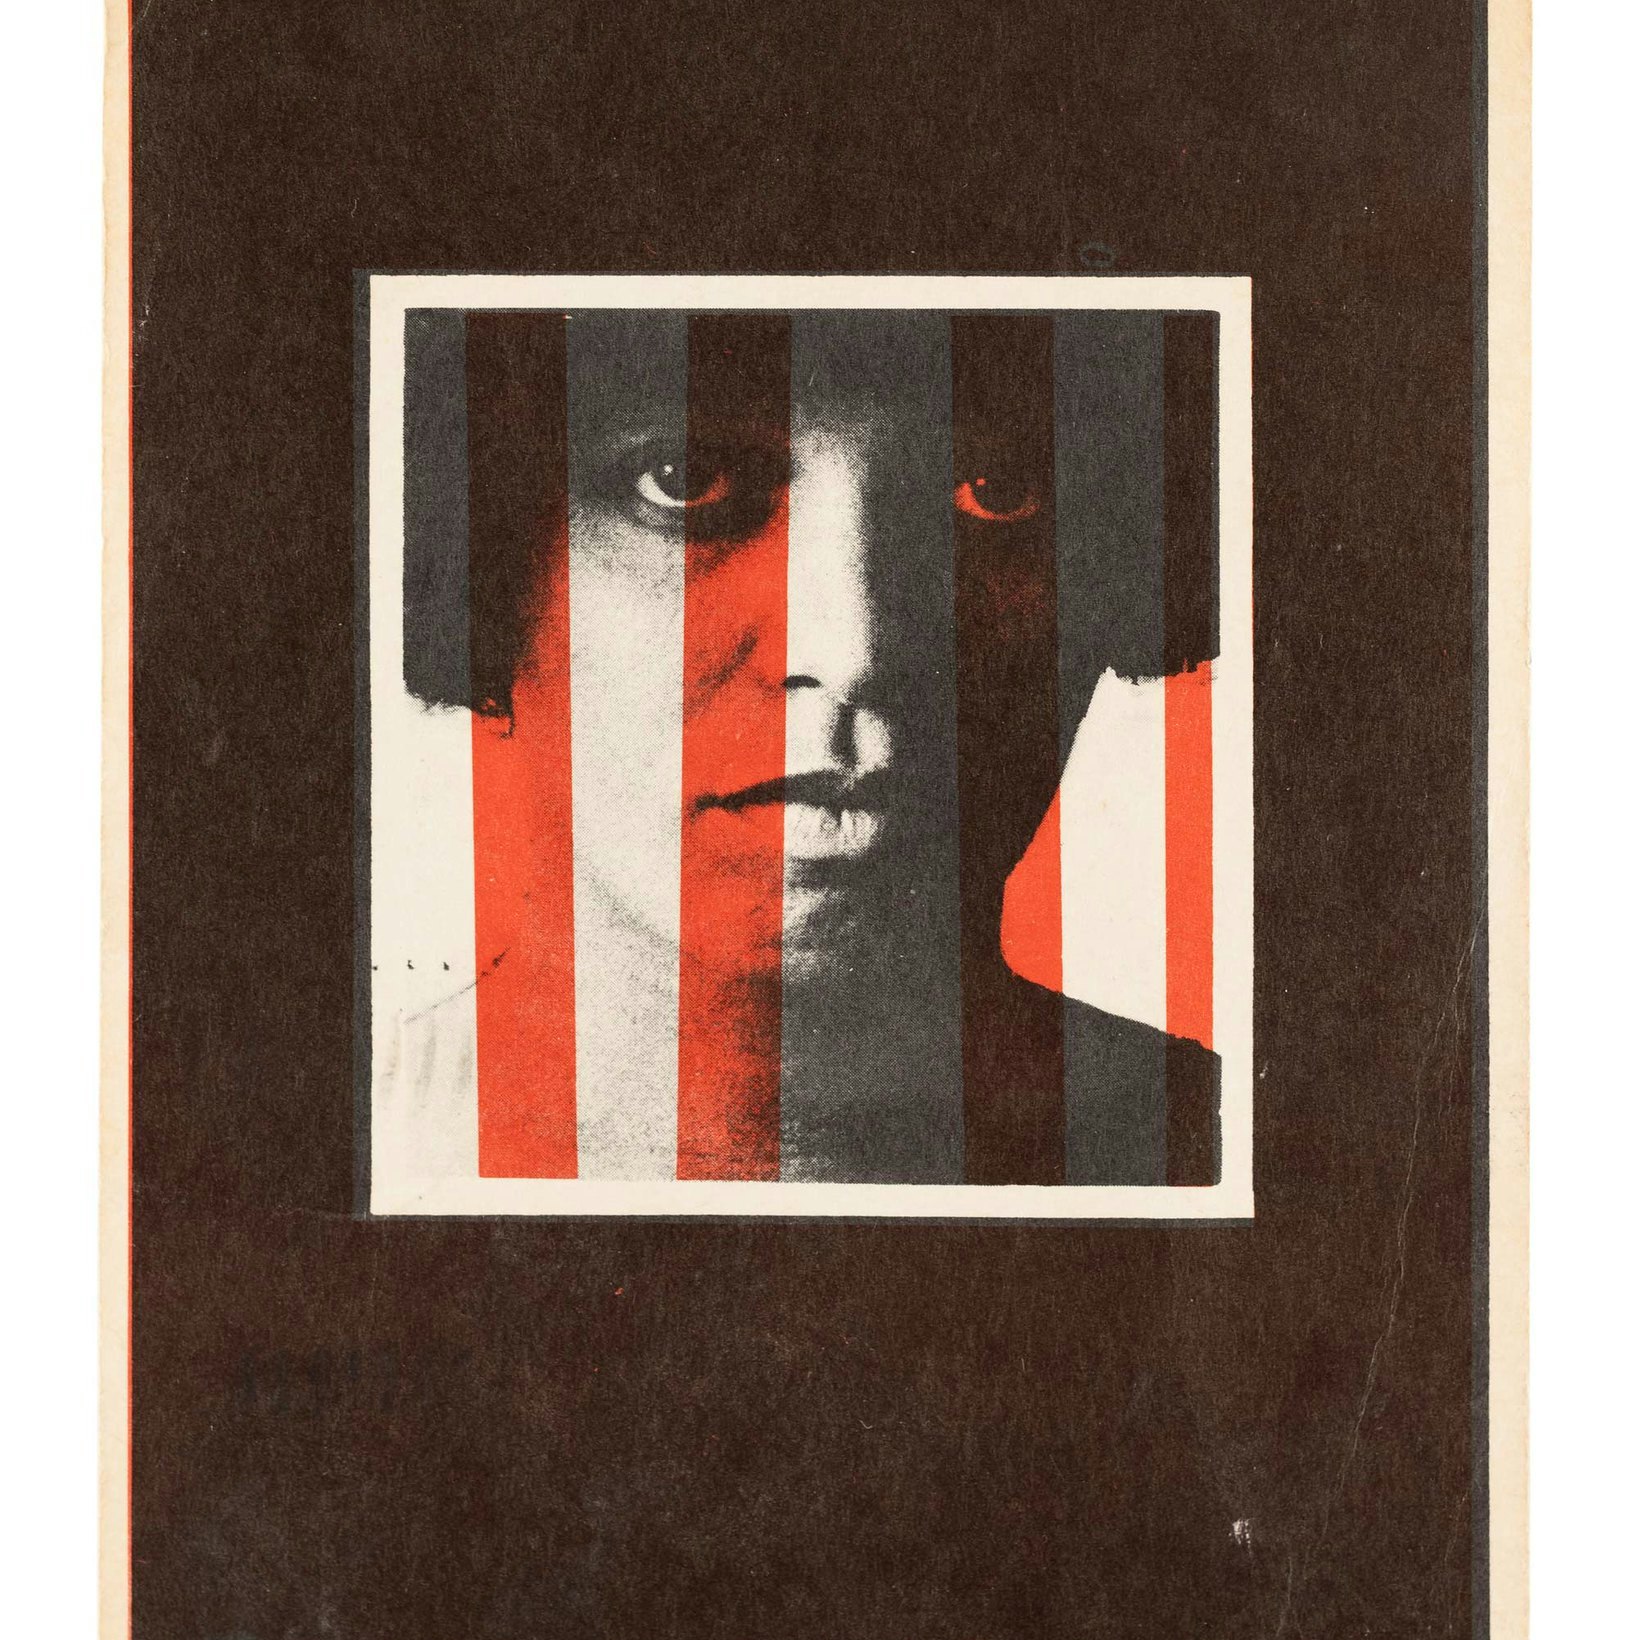 Postcard with text "Free Angela!" Image is of Angela Davis' face with red stripes vertically.